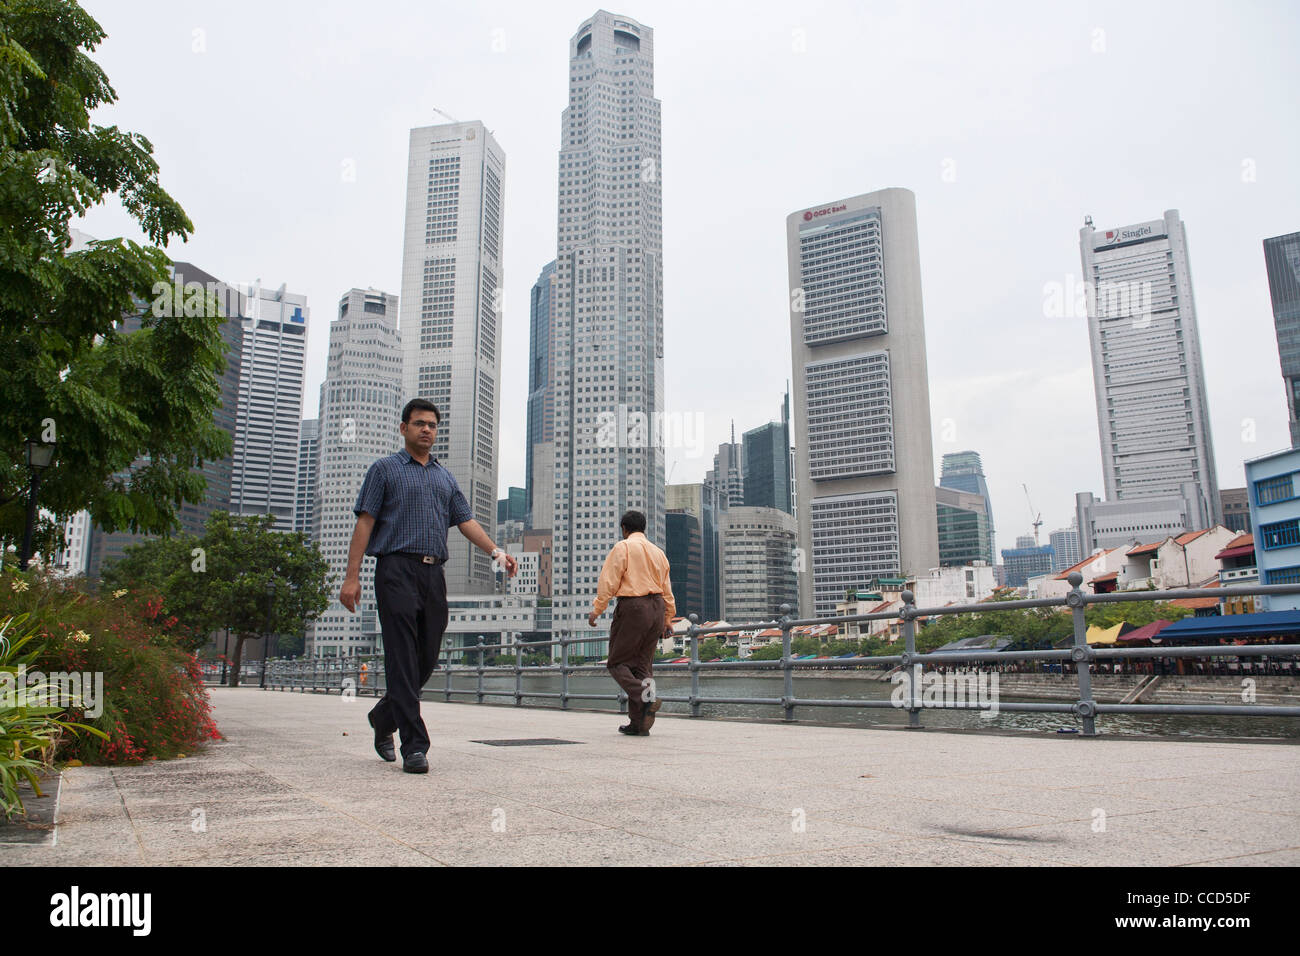 People walk past the central business district of Singapore Stock Photo